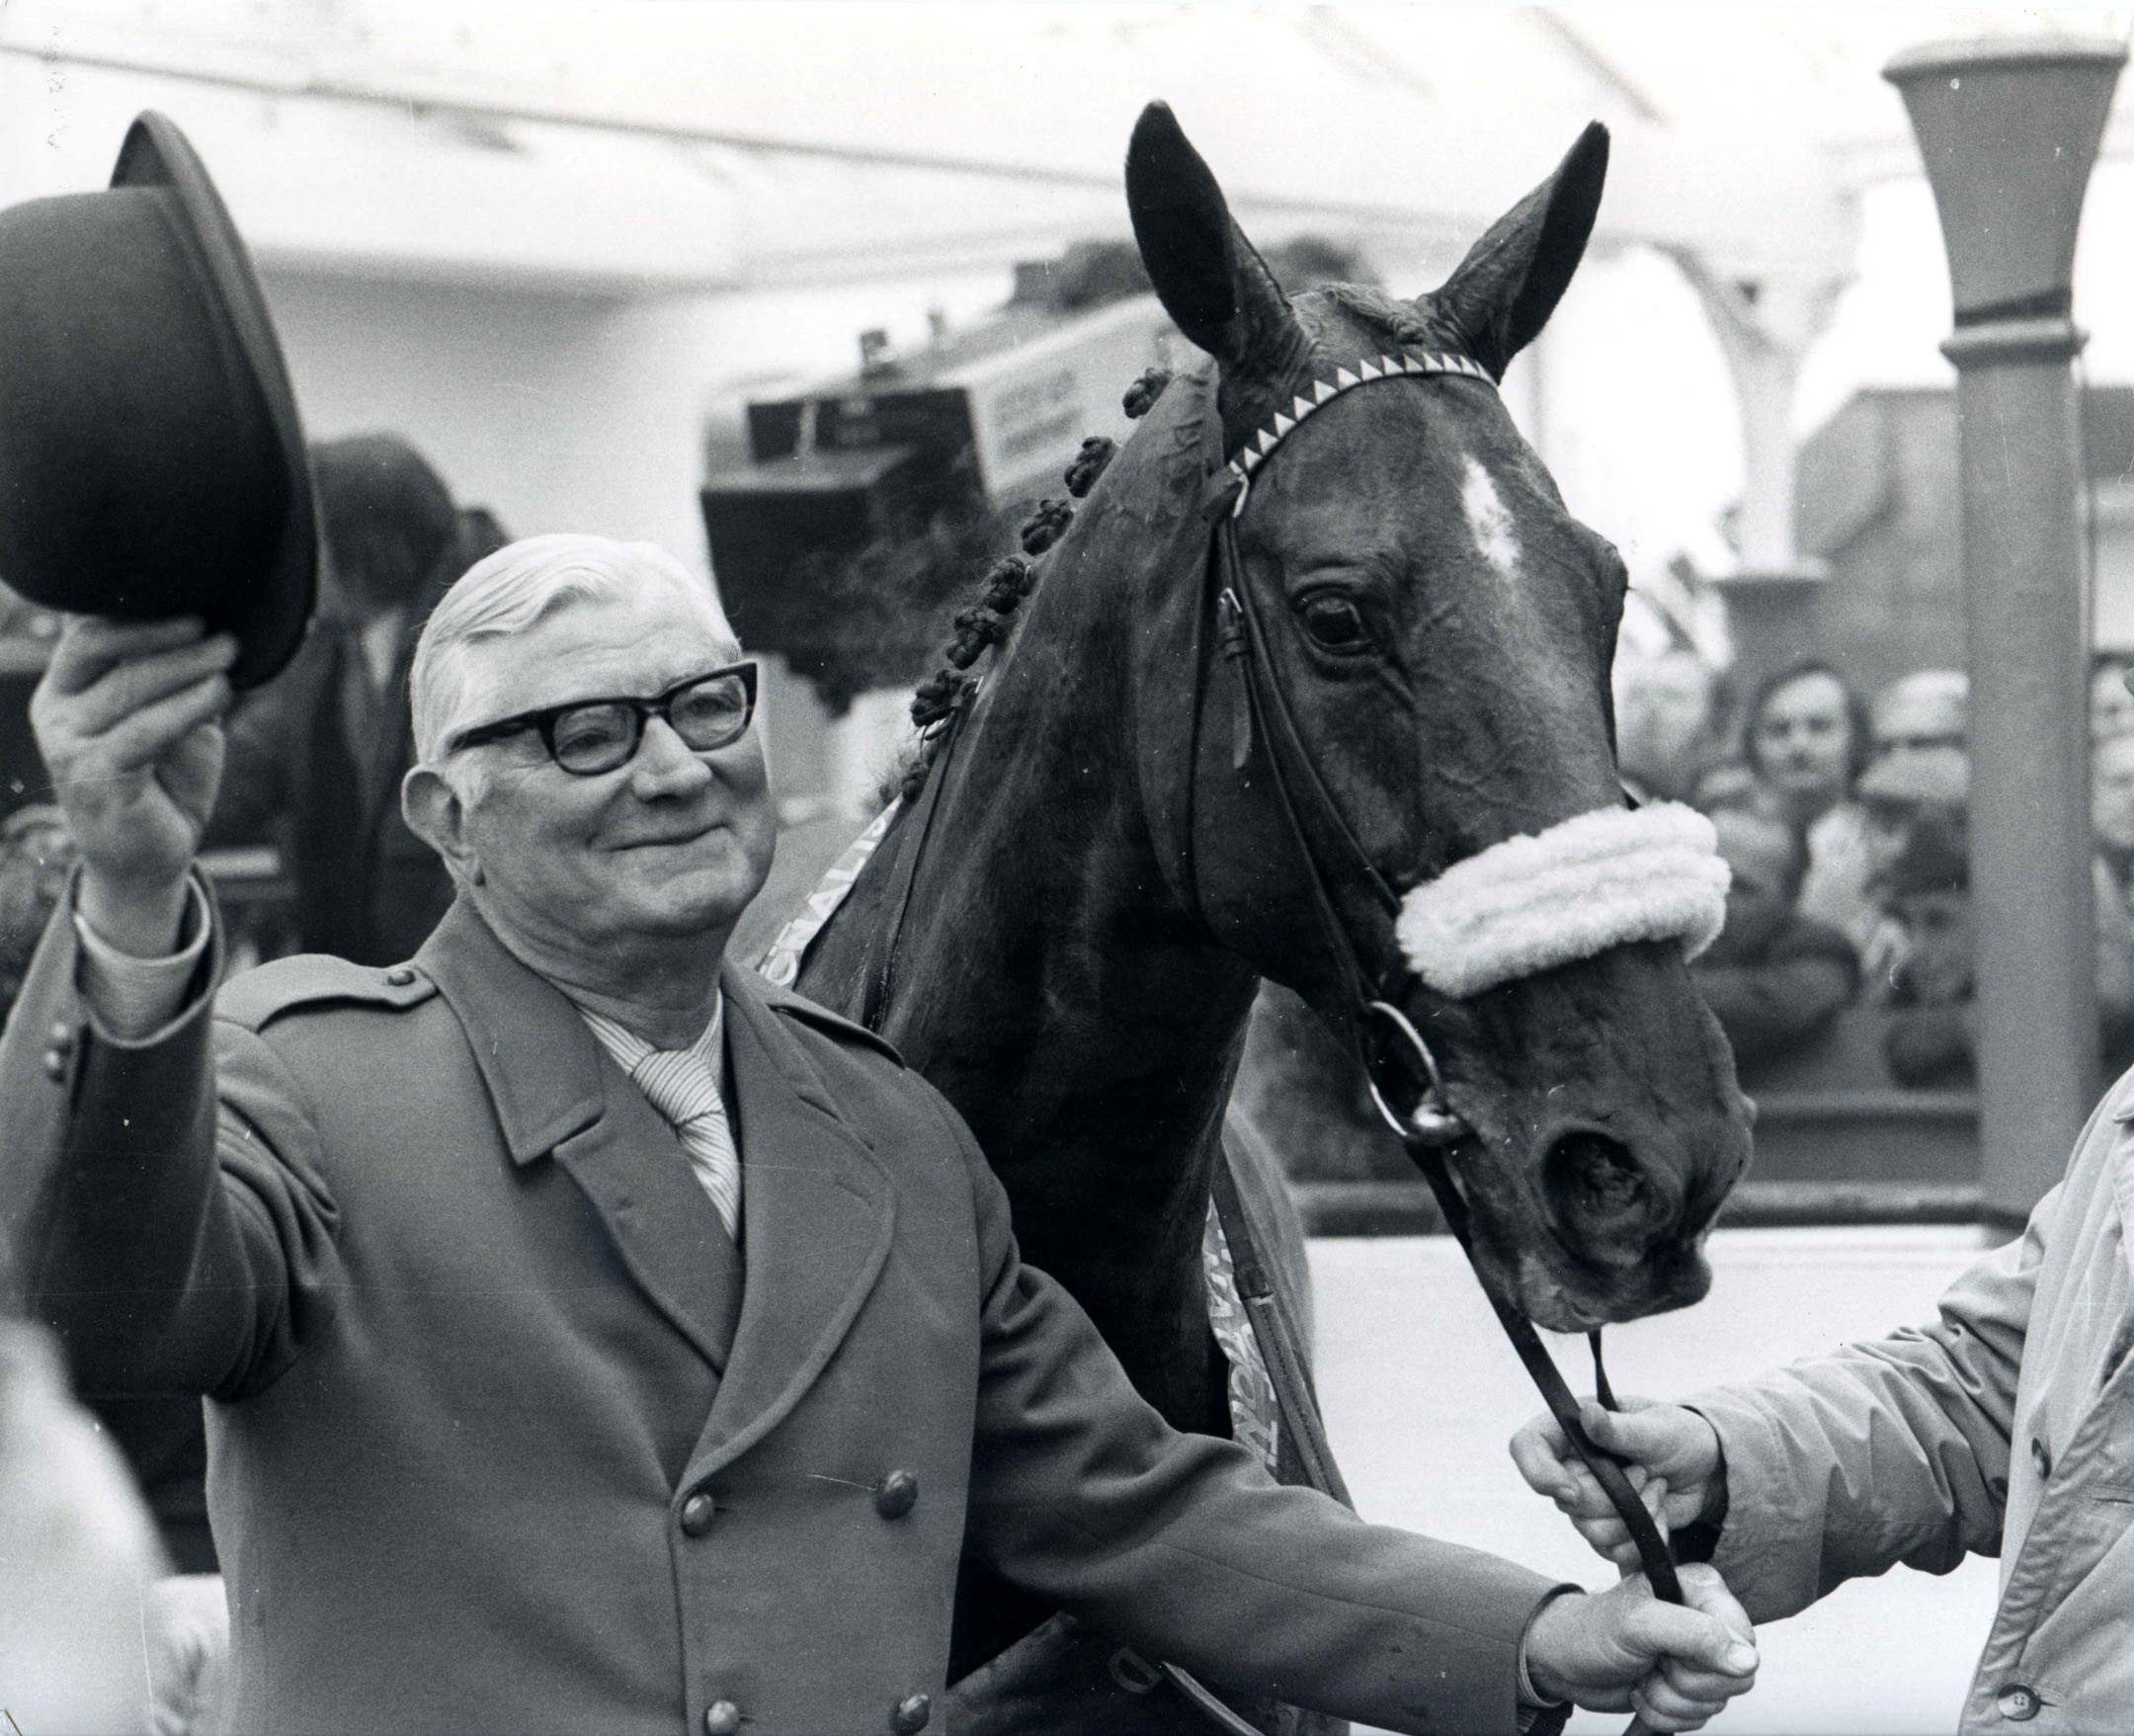 L'Escargot and Raymond Guest after winning the 1975 Grand National Steeplechase at Aintree (Gerry Cranham/Museum Collection)